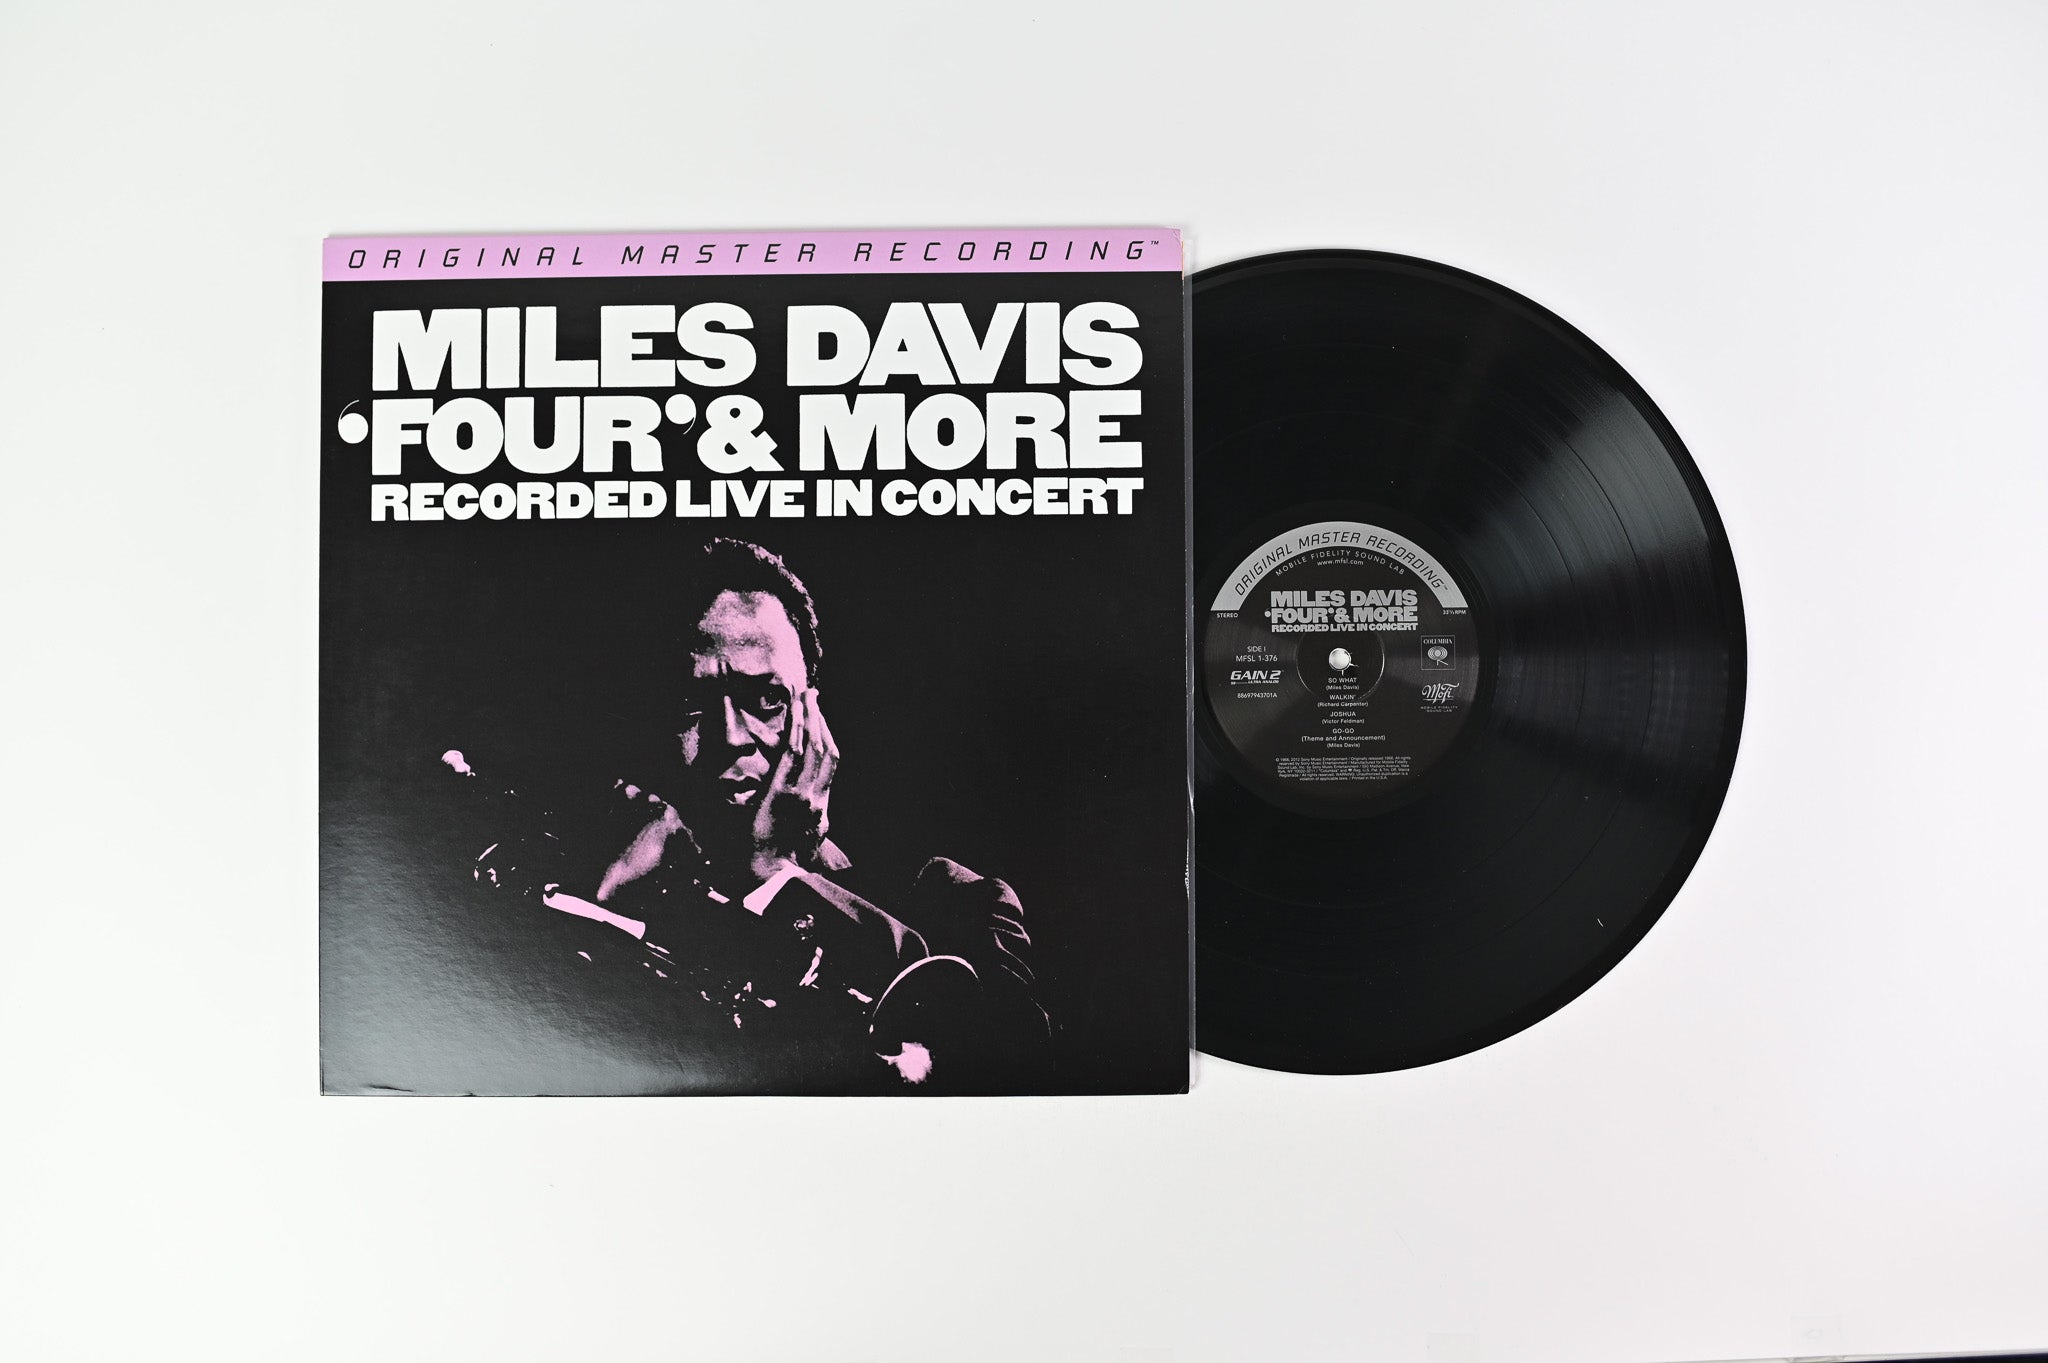 Miles Davis - 'Four' & More - Recorded Live In Concert Mobile Fidelity Sound Lab Reissue